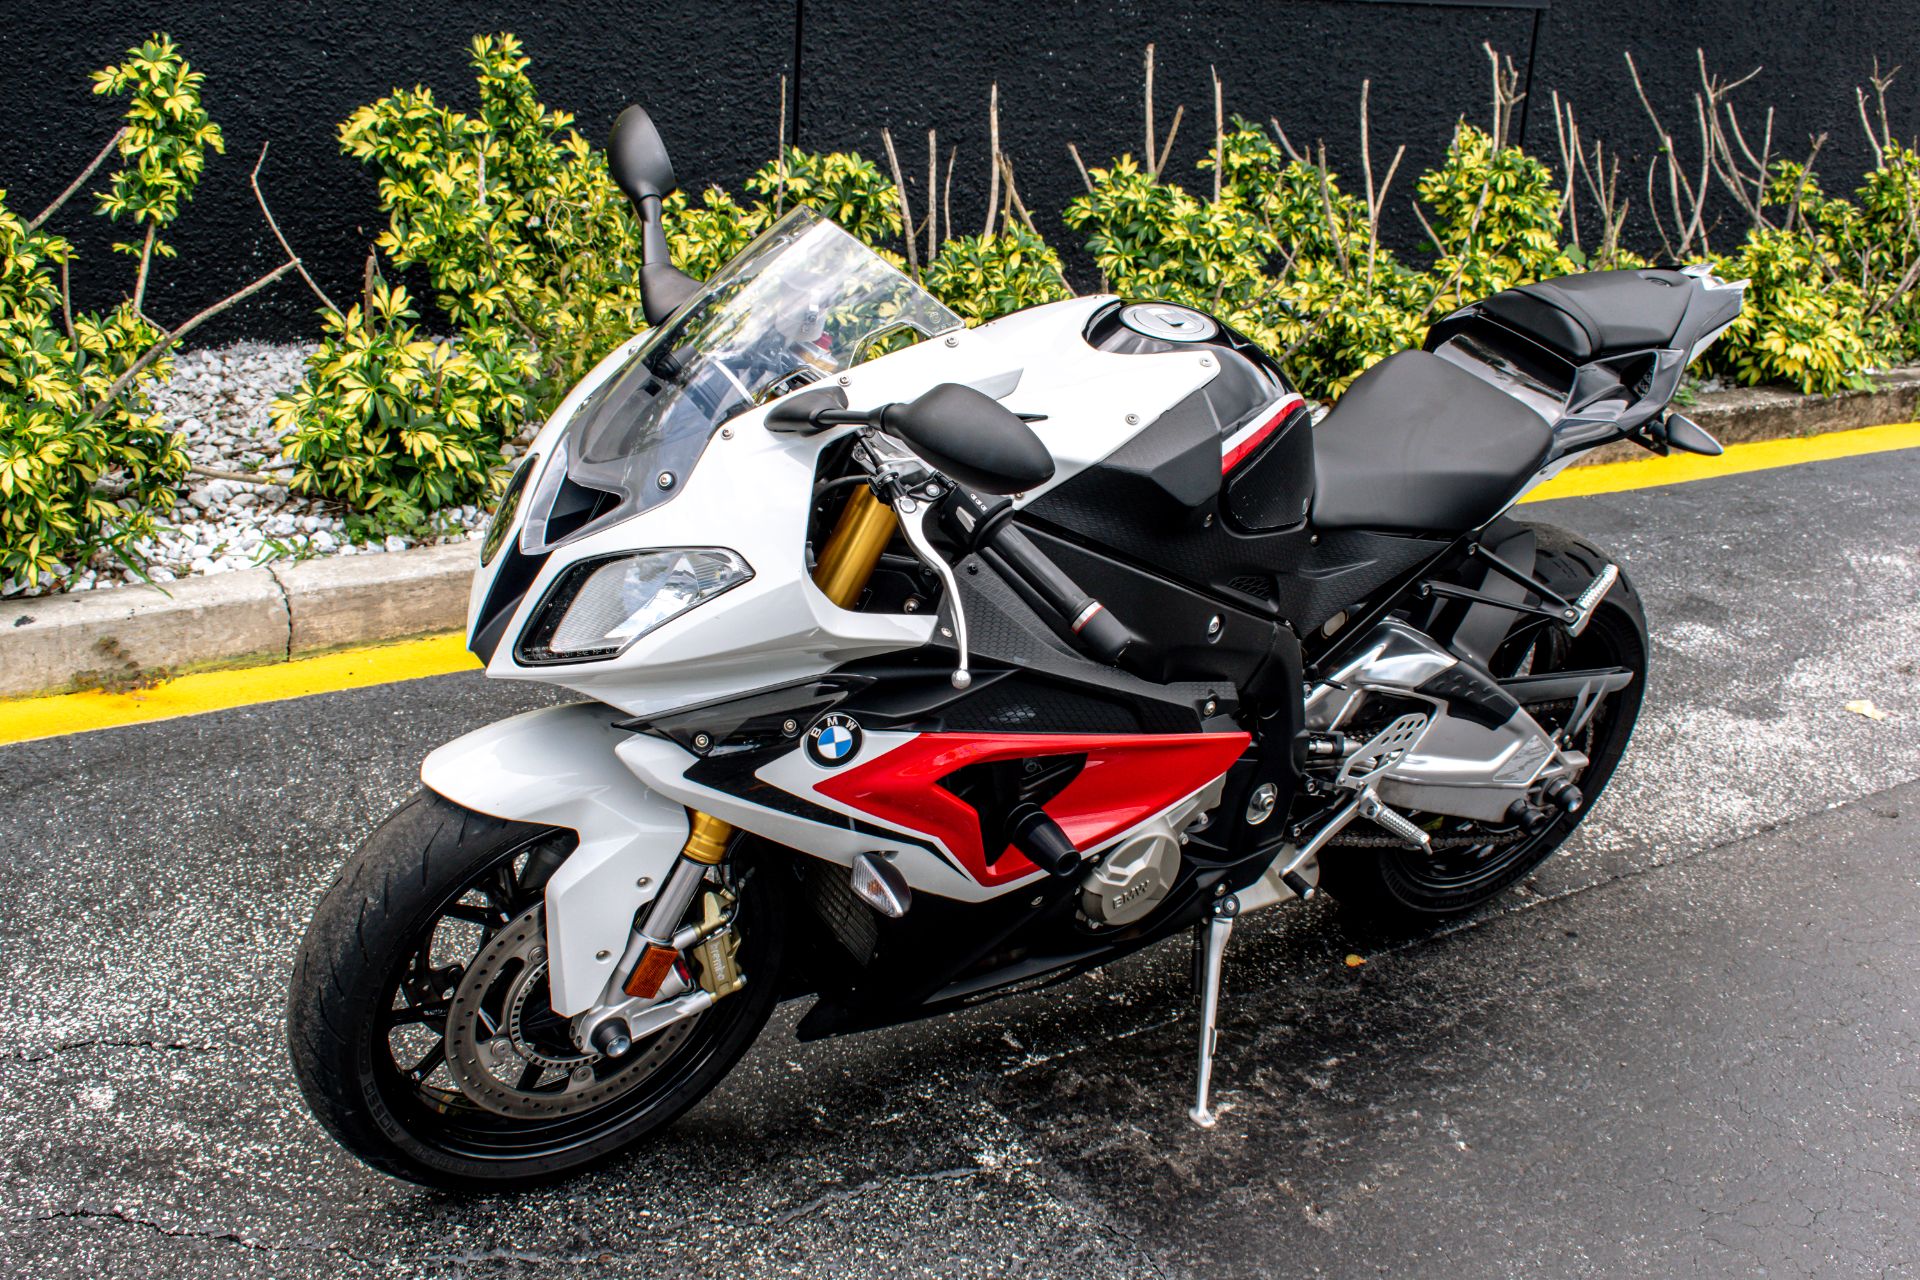 2014 BMW S 1000 RR in Jacksonville, Florida - Photo 15